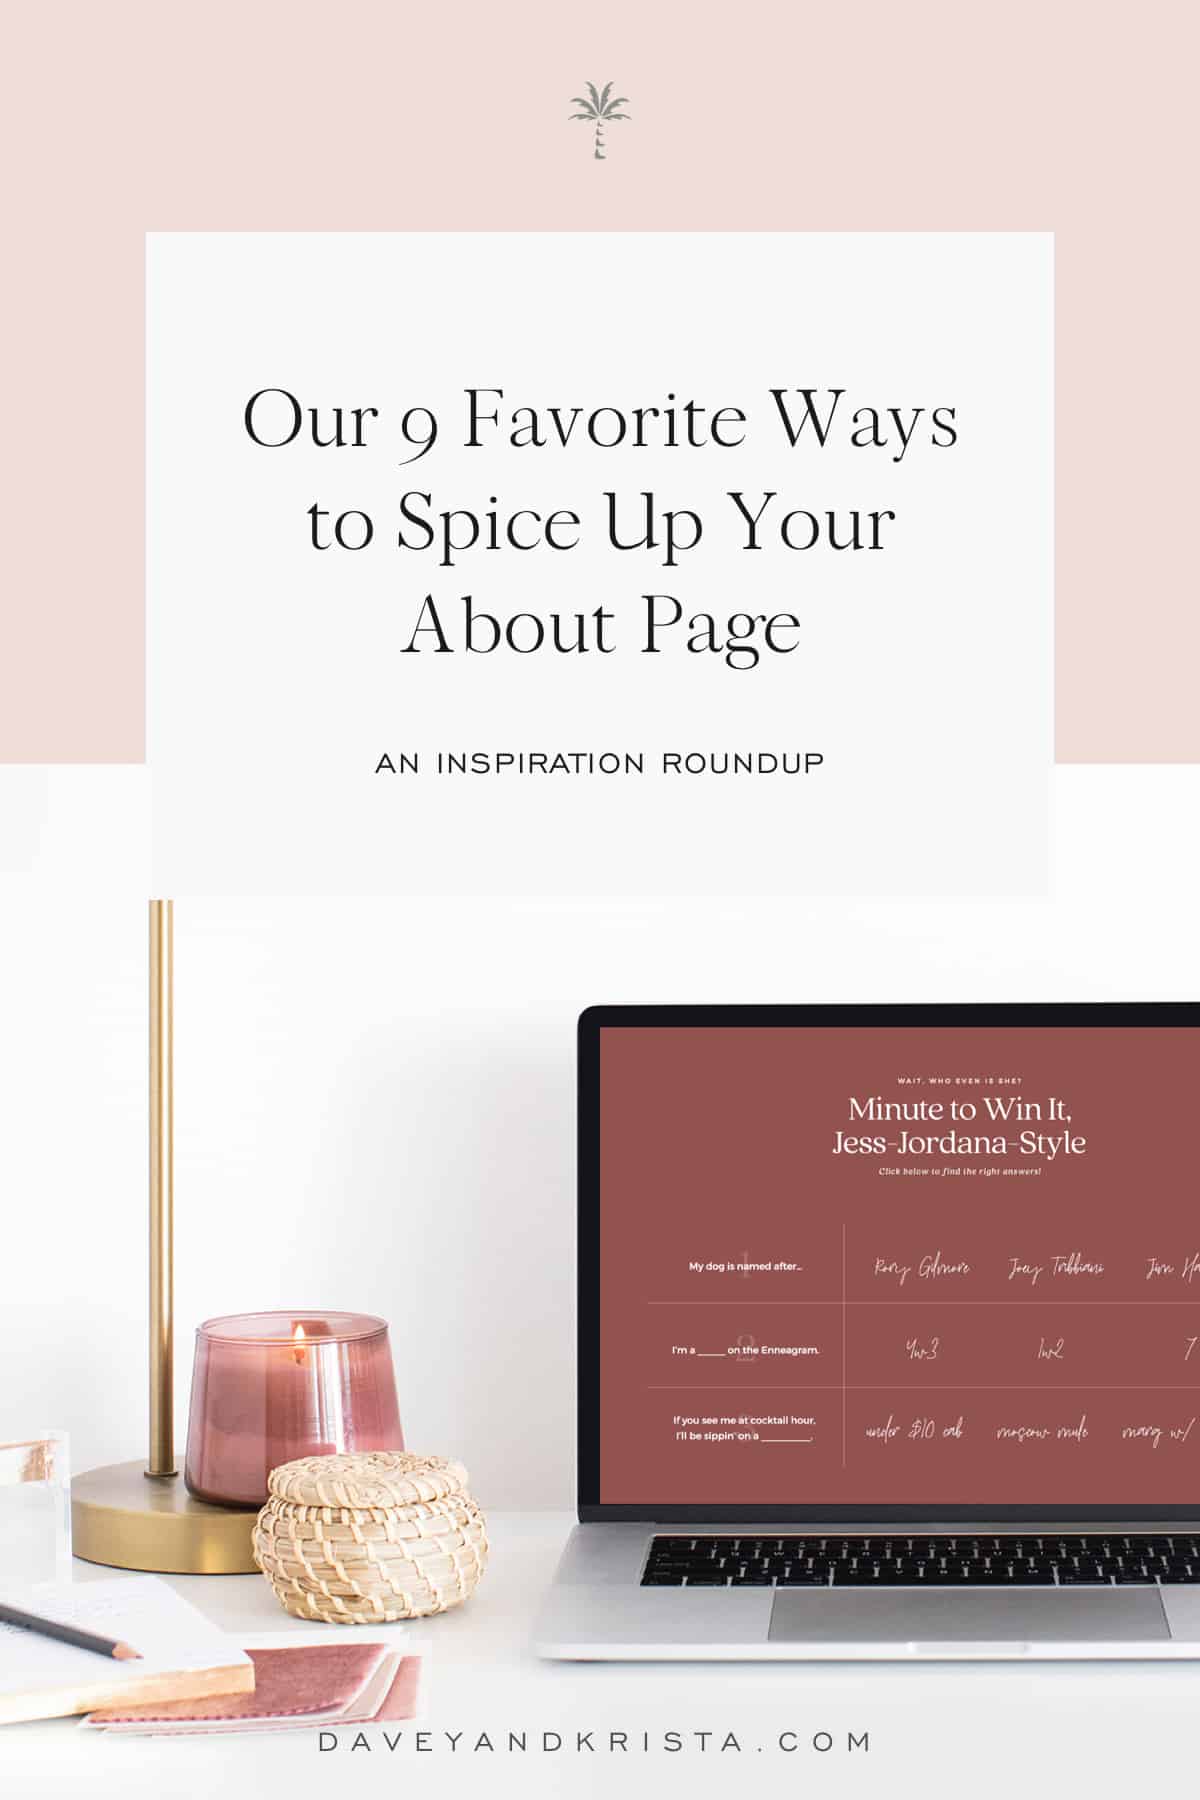 Our 9 Favorite Ways to Spice Up Your About Page | Davey & Krista